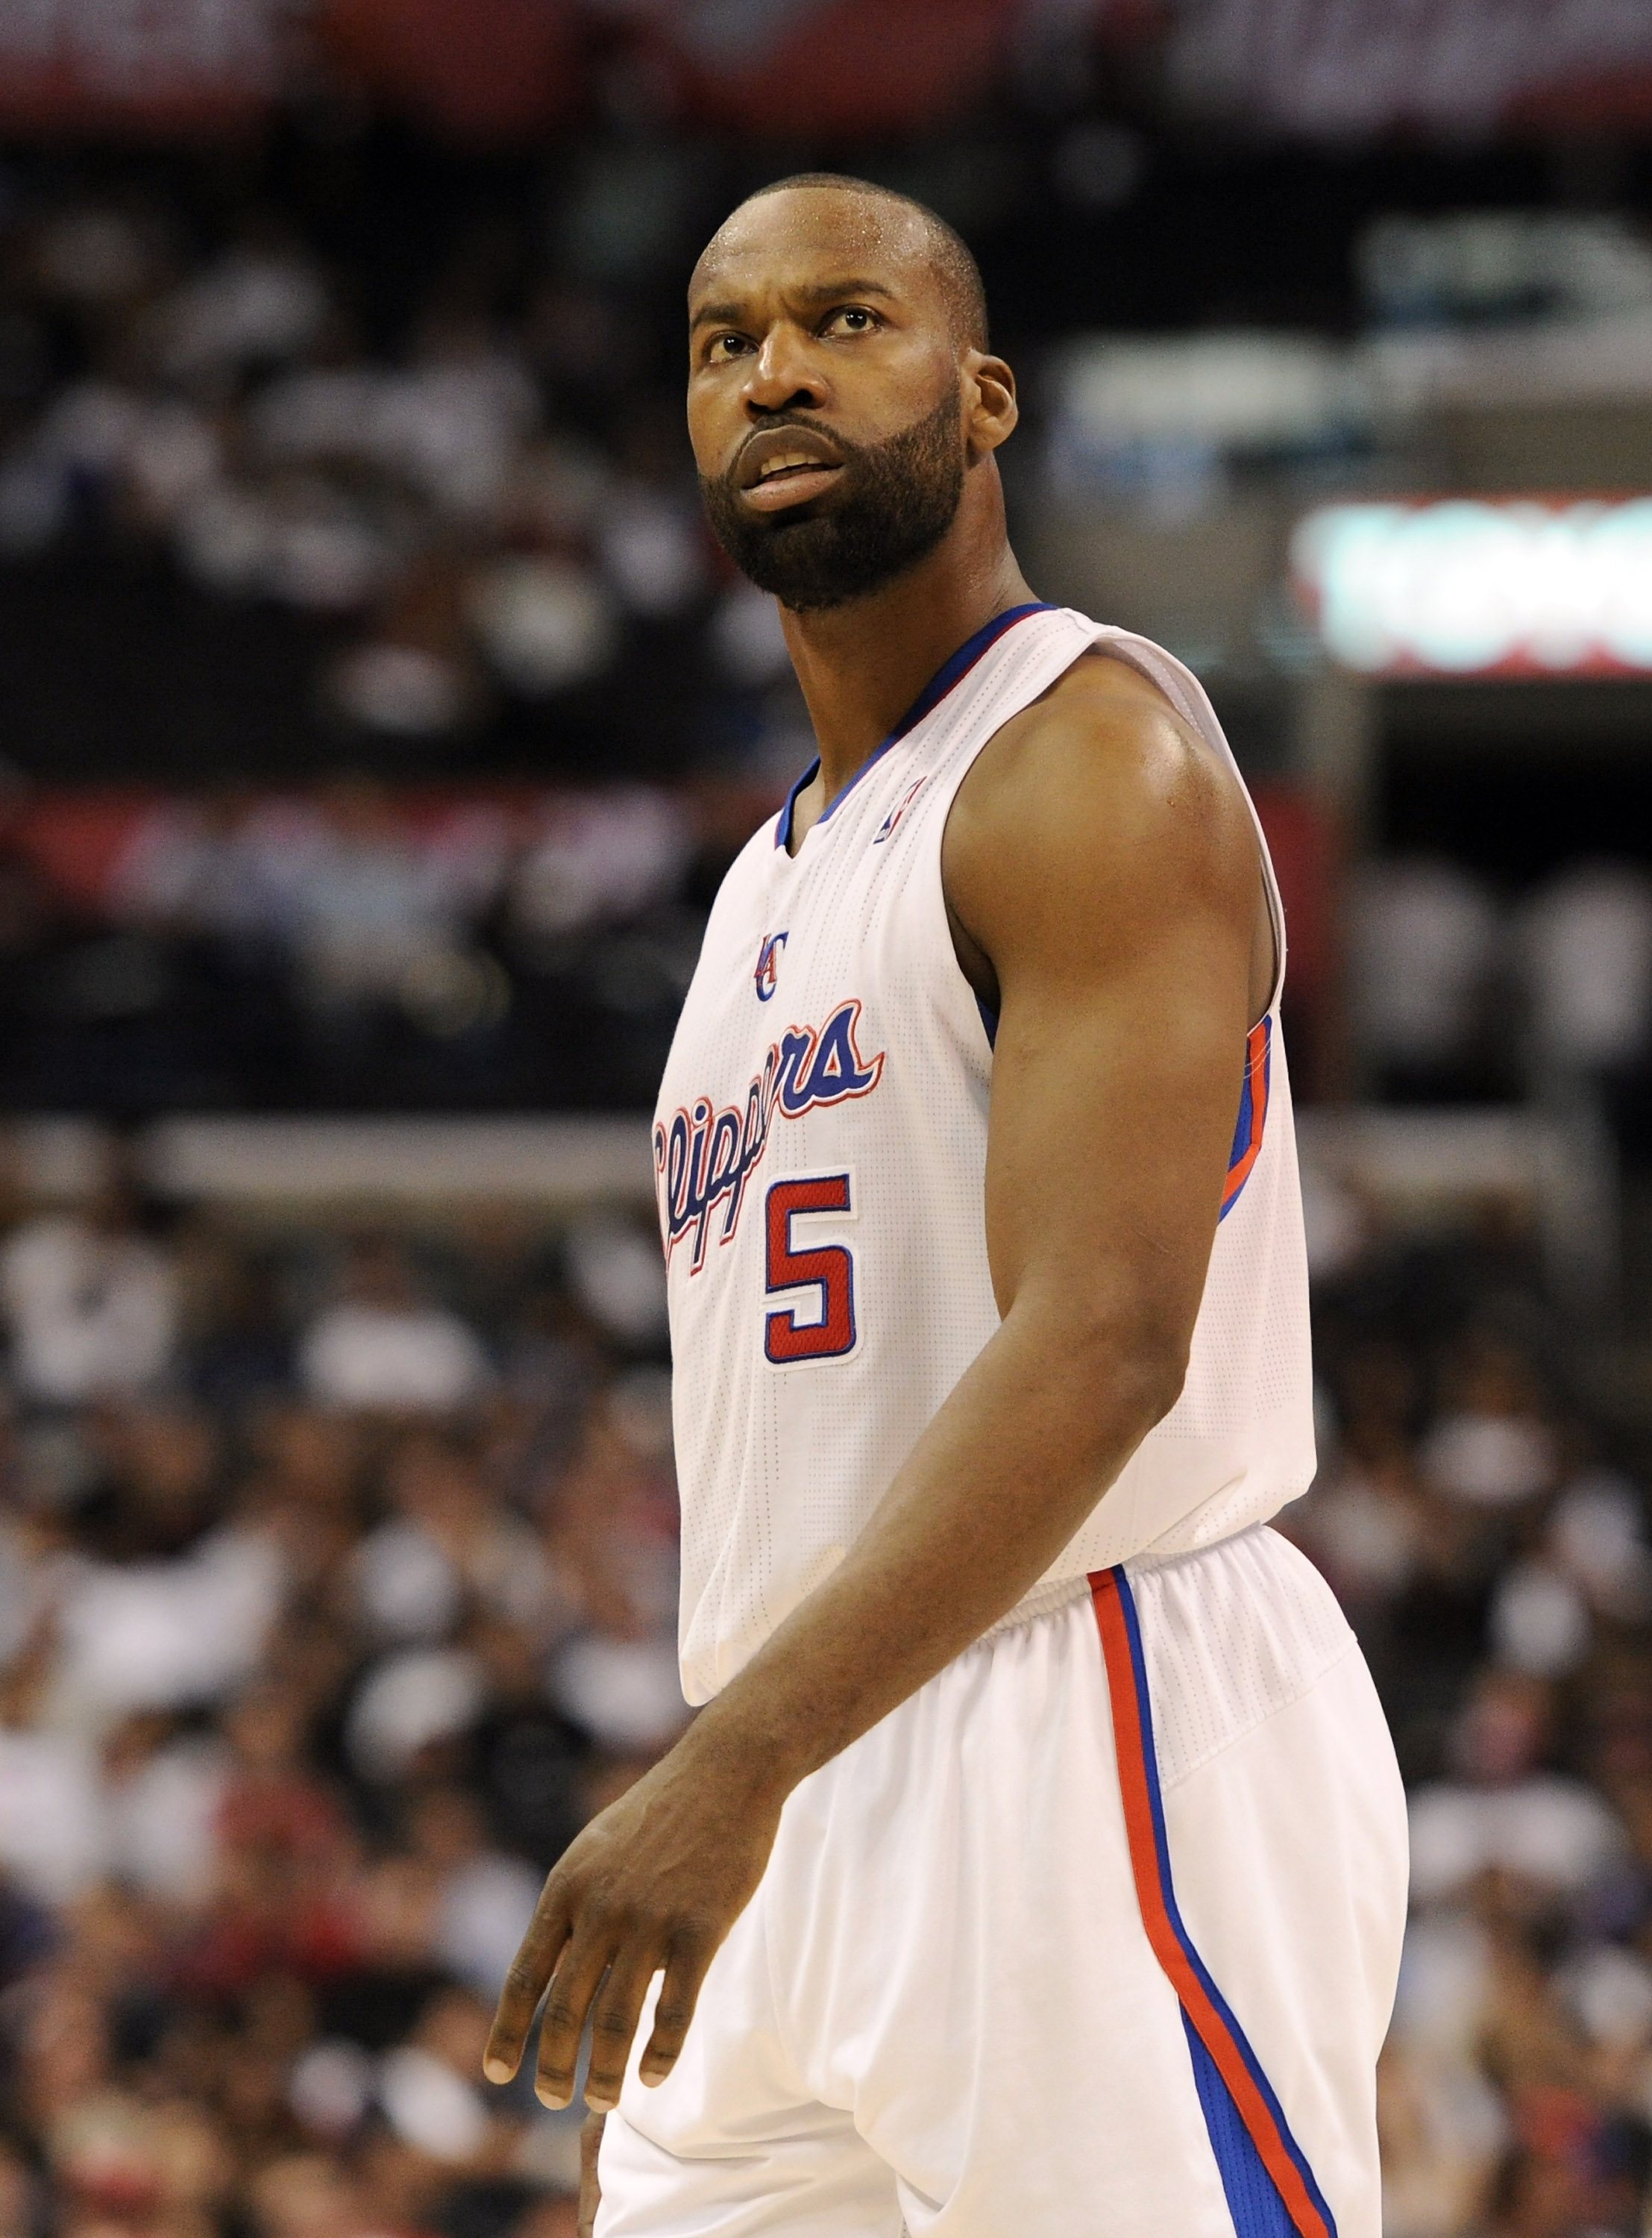 LOS ANGELES, CA - OCTOBER 27:  Baron Davis #5 of the Los Angeles Clippers reacts as he leaves the floor during a 98-88 loss to the Portland Trail Blazers at Staples Center on October 27, 2010 in Los Angeles, California. NOTE TO USER: User expressly acknow